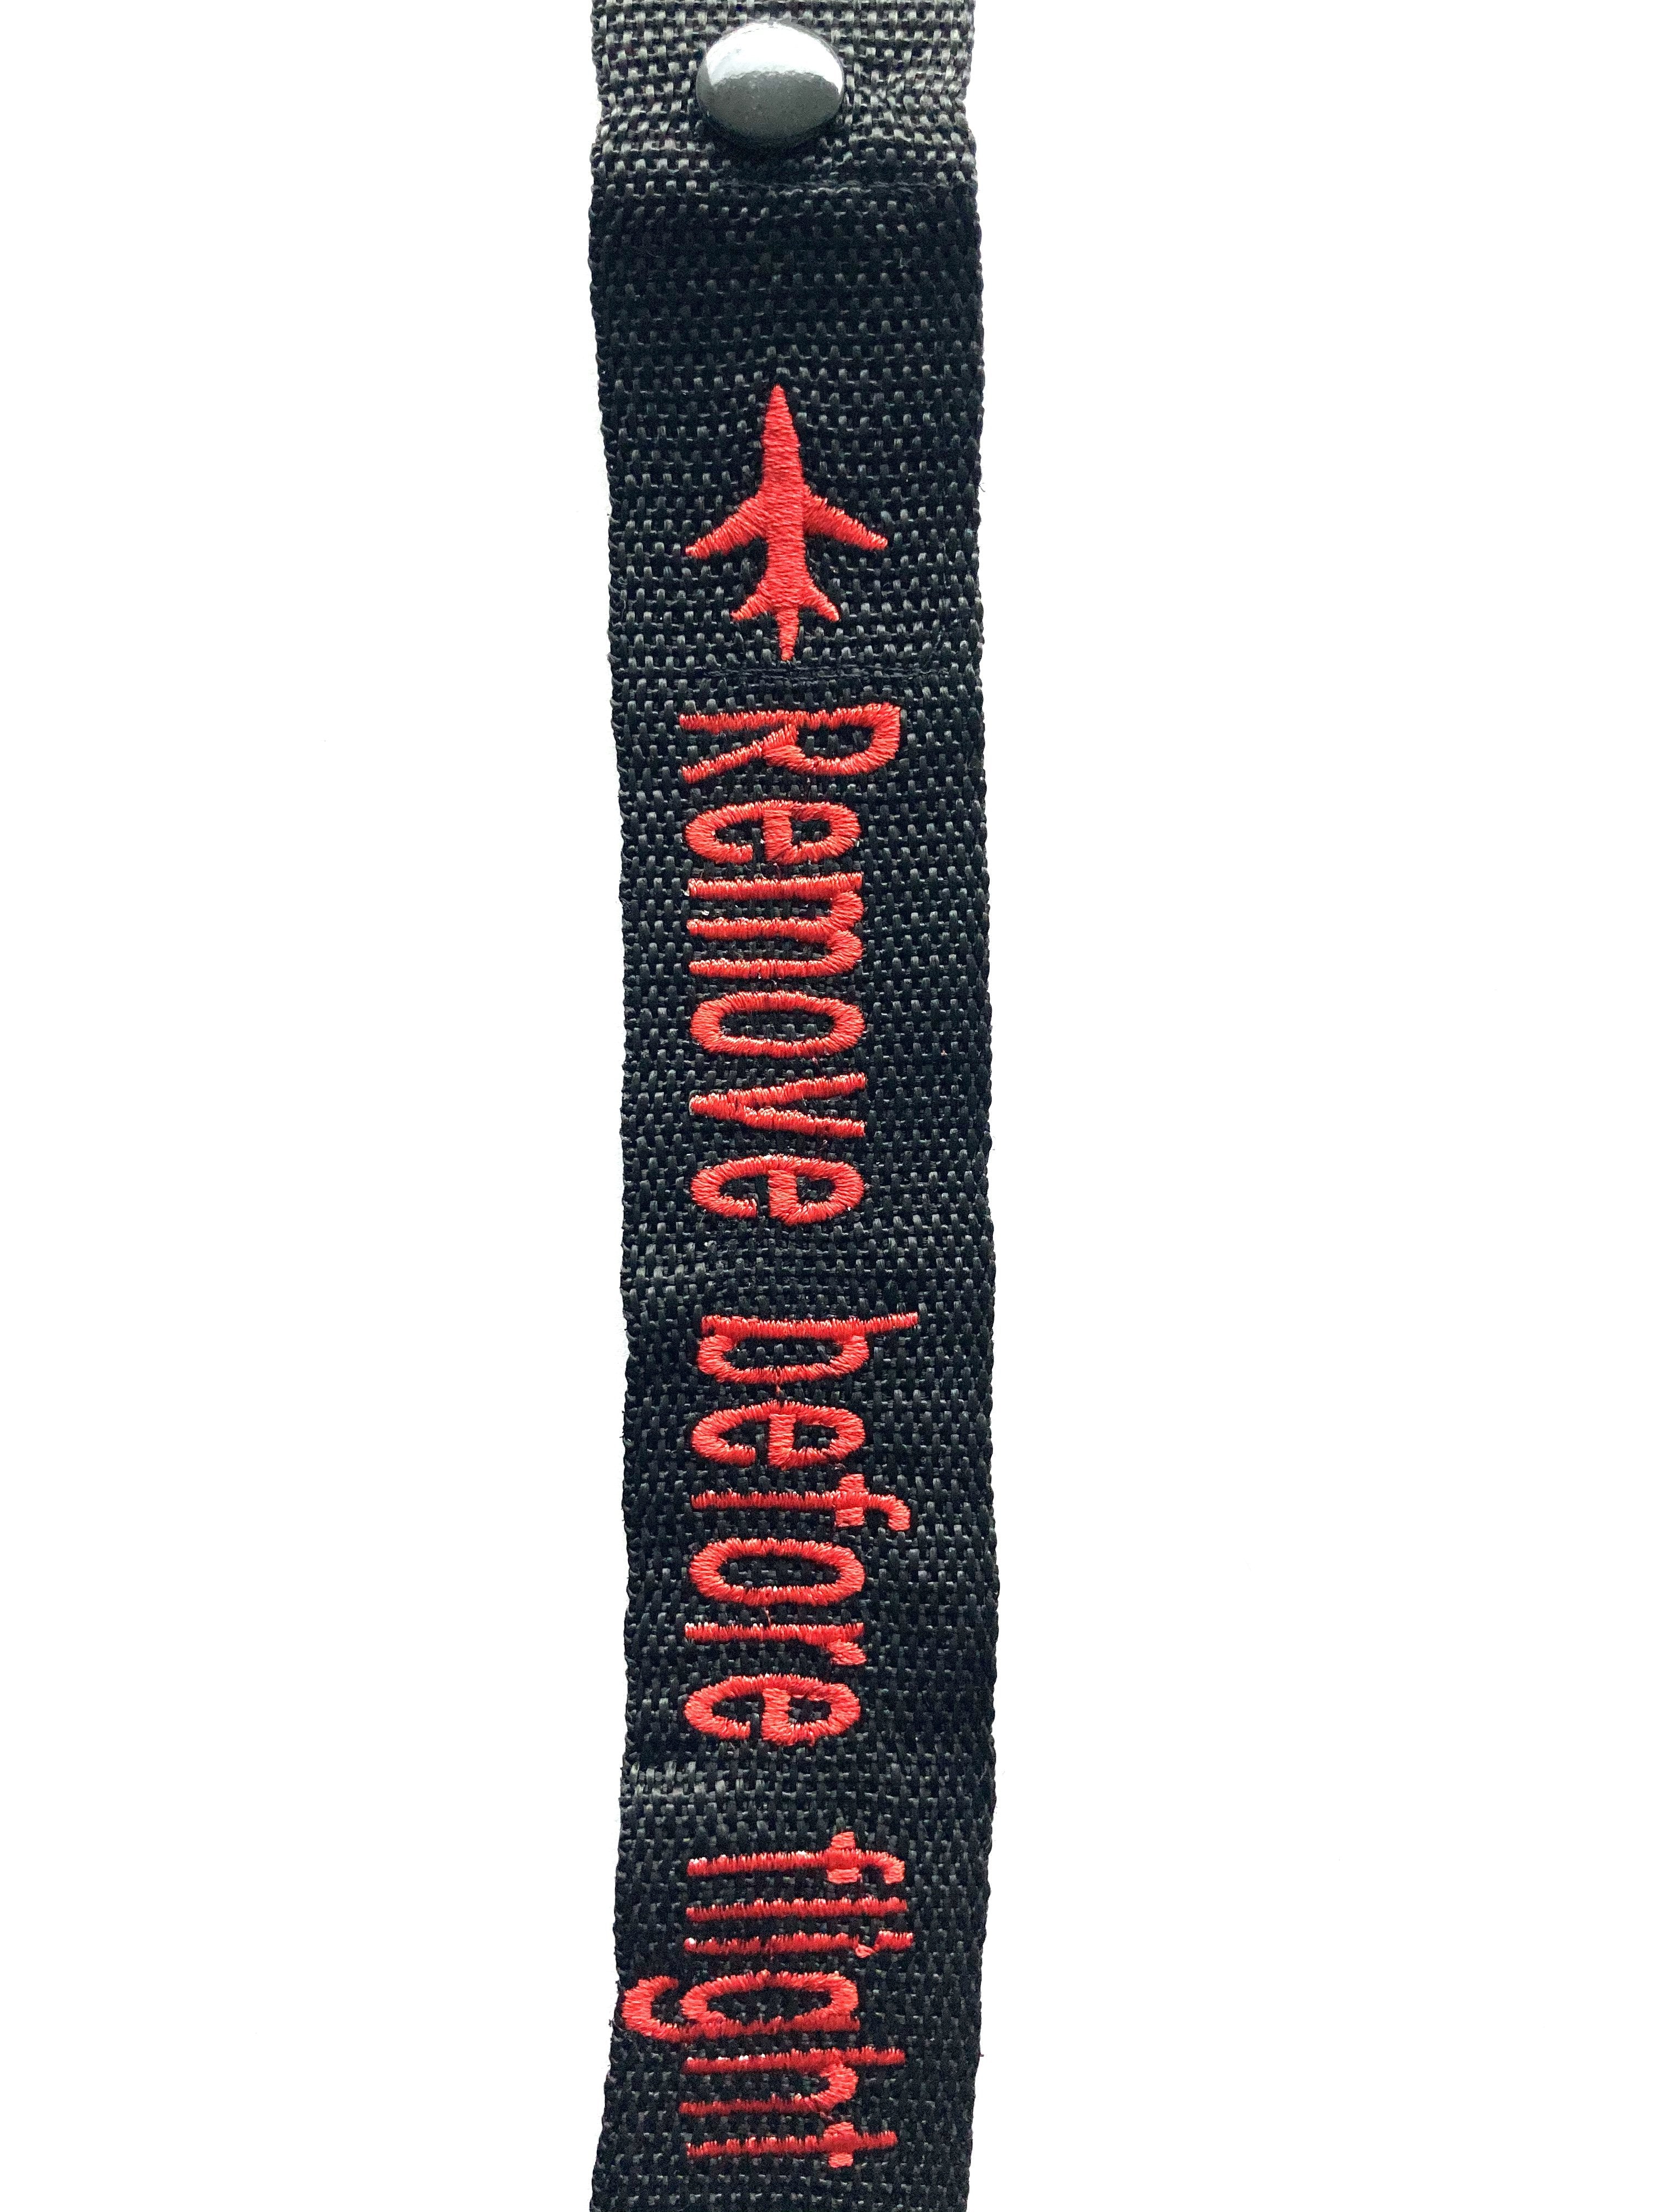 AIRLINE LINGO LUGGAGE TAGS Remove before flight